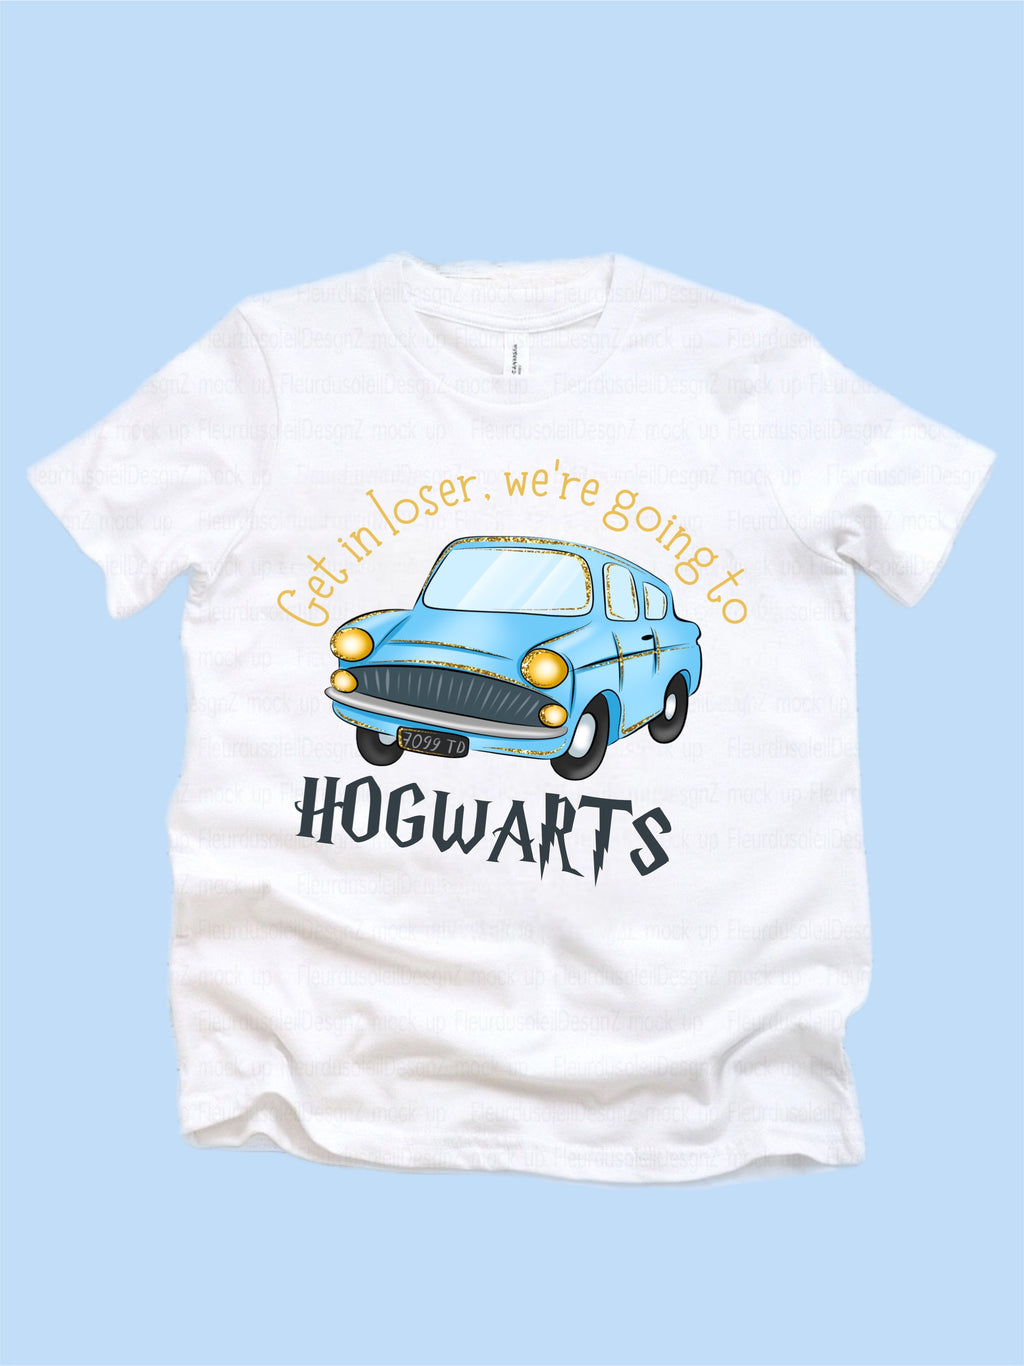 Get in Loser, we’re going to Hogarts T-shirt